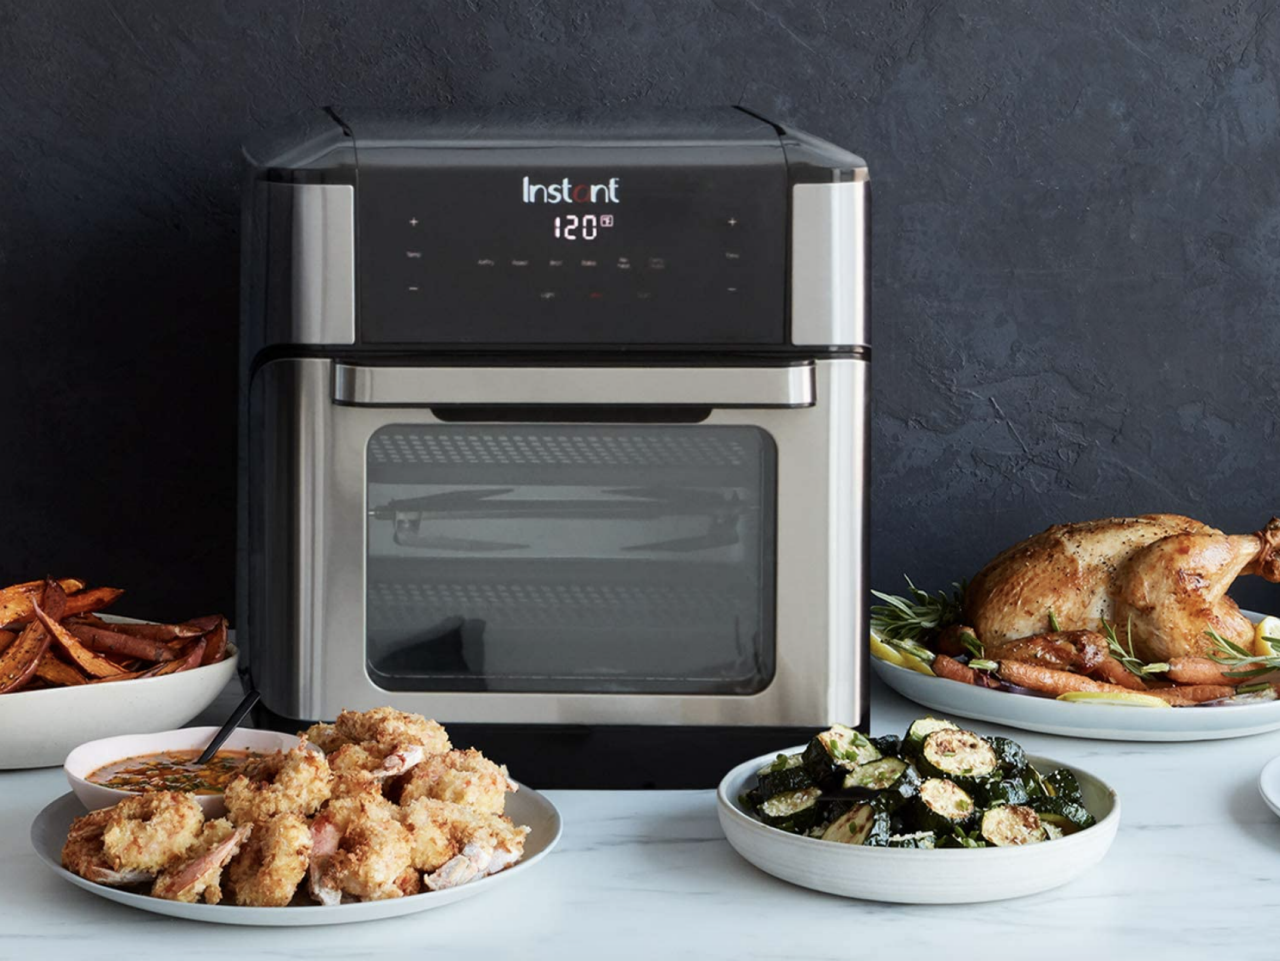 Enjoy guilt-free meals with DASH's deluxe air fryer oven on sale